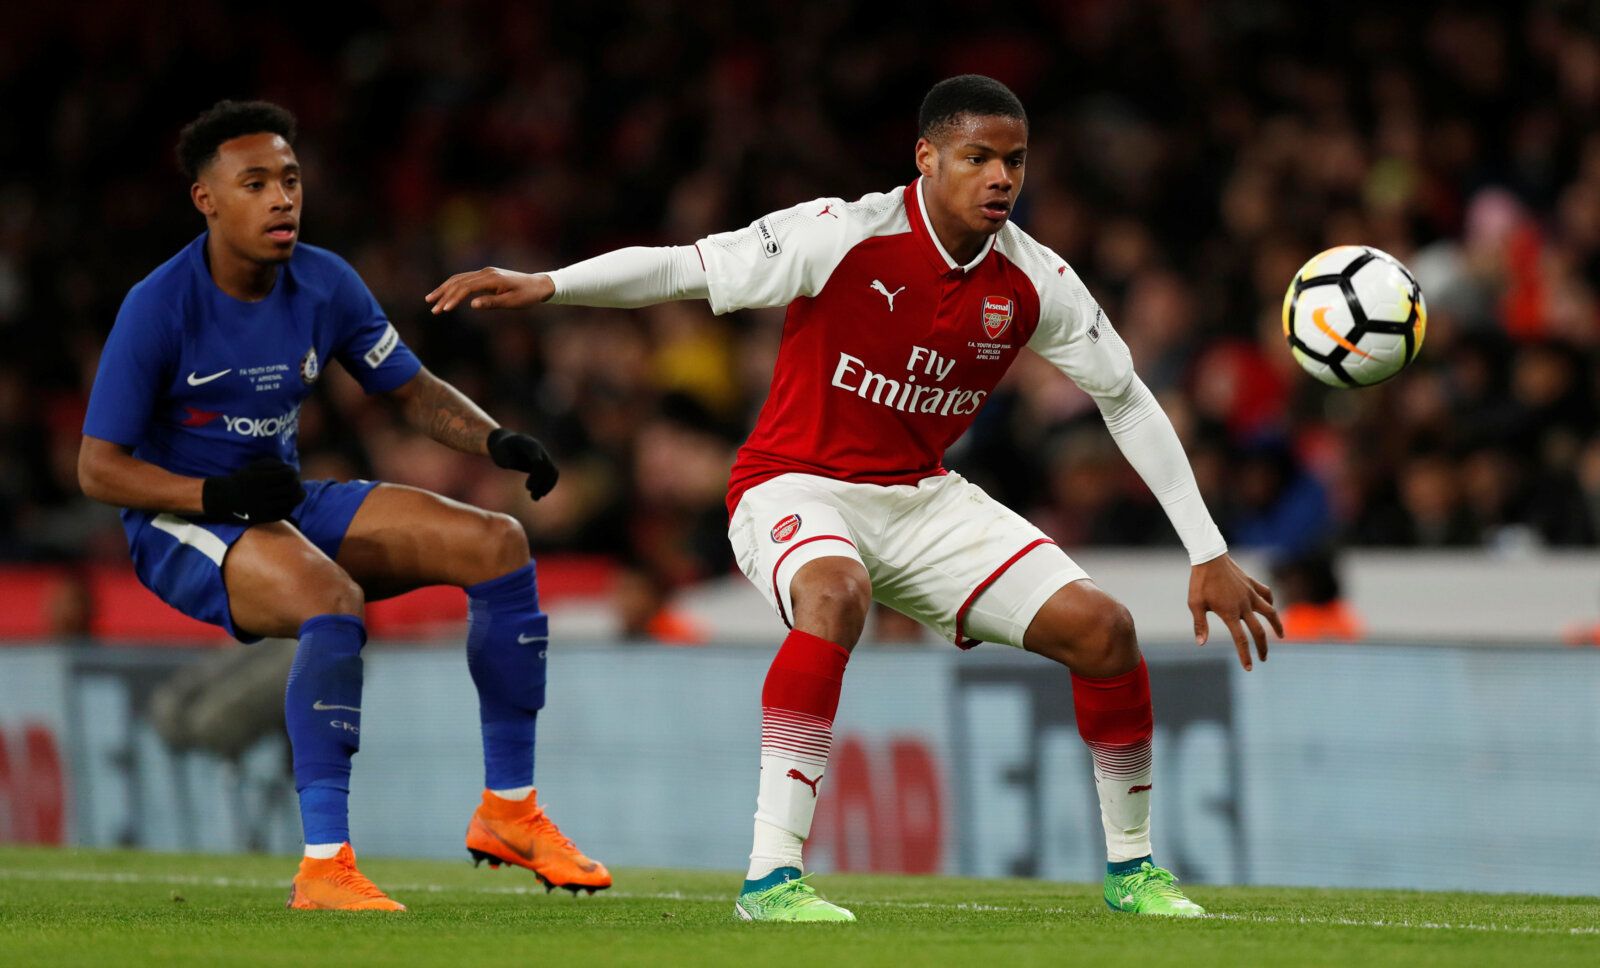 Soccer Football - FA Youth Cup Final Second Leg - Arsenal vs Chelsea - Emirates Stadium, London, Britain - April 30, 2018   Arsenal's Vontae Daley Campbell in action with Chelsea's Juan Castillo   Action Images via Reuters/Peter Cziborra